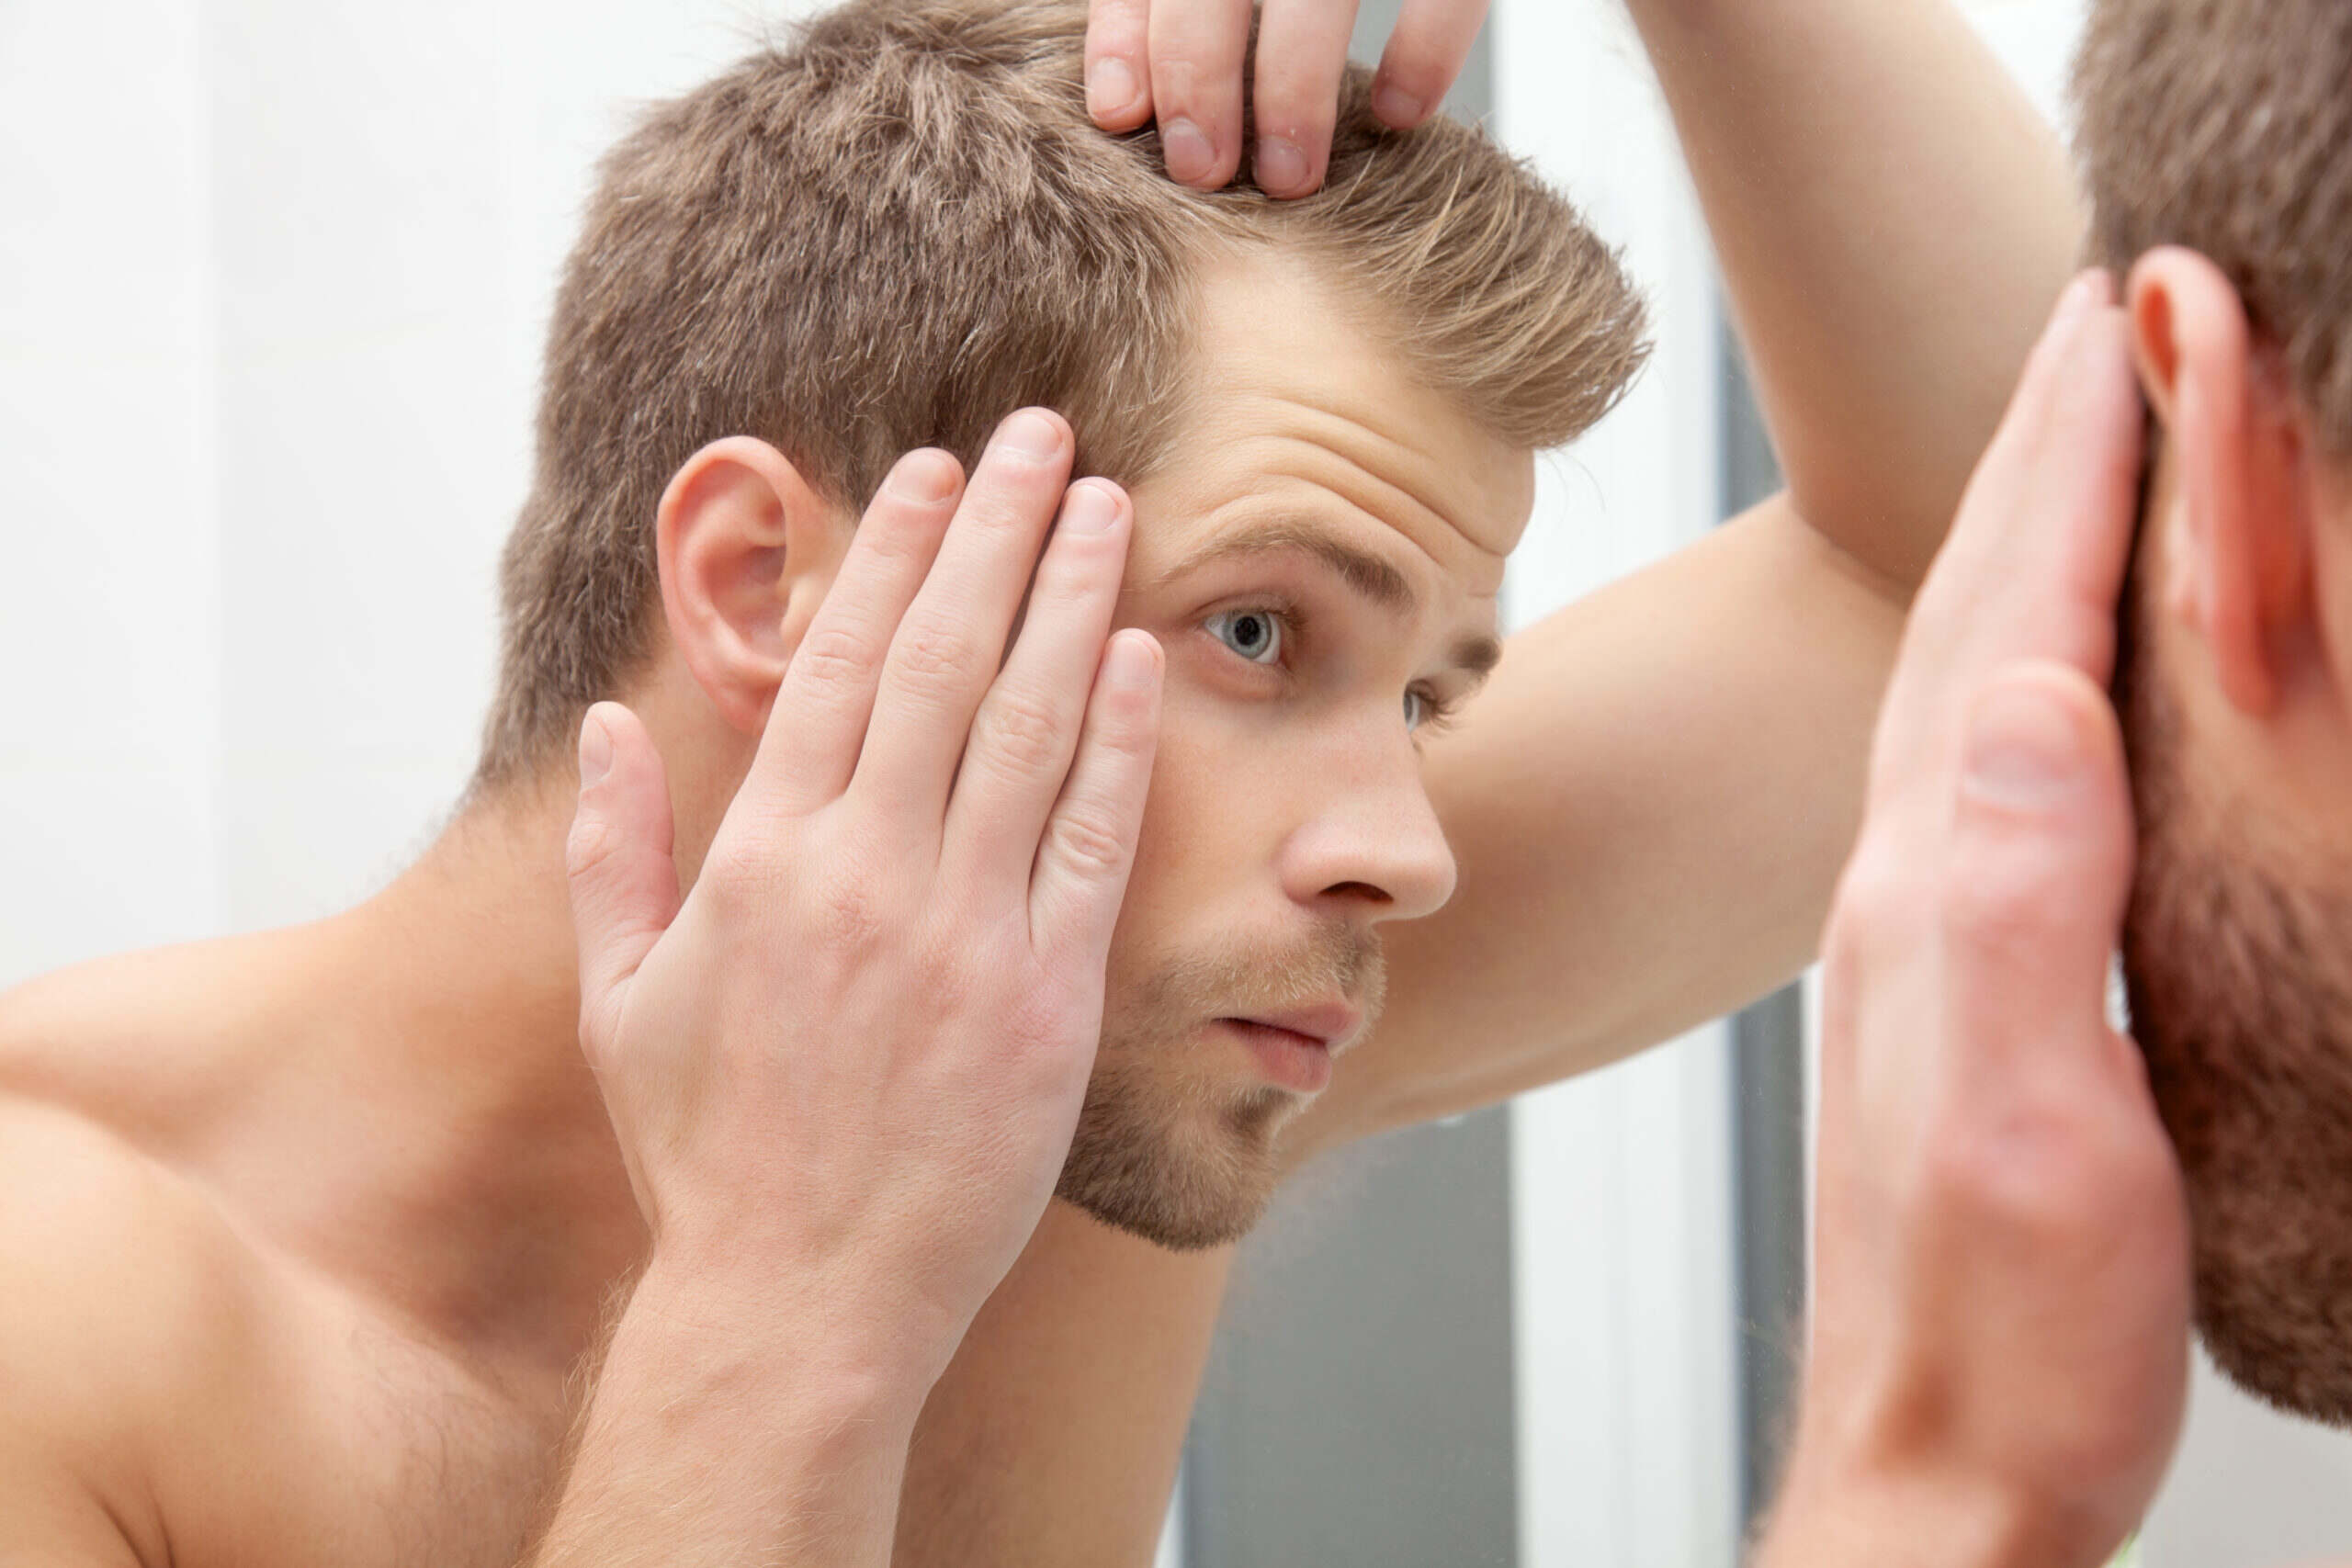 Young man assessing his hair loss in the mirror and thinking about hair restoration treatments.